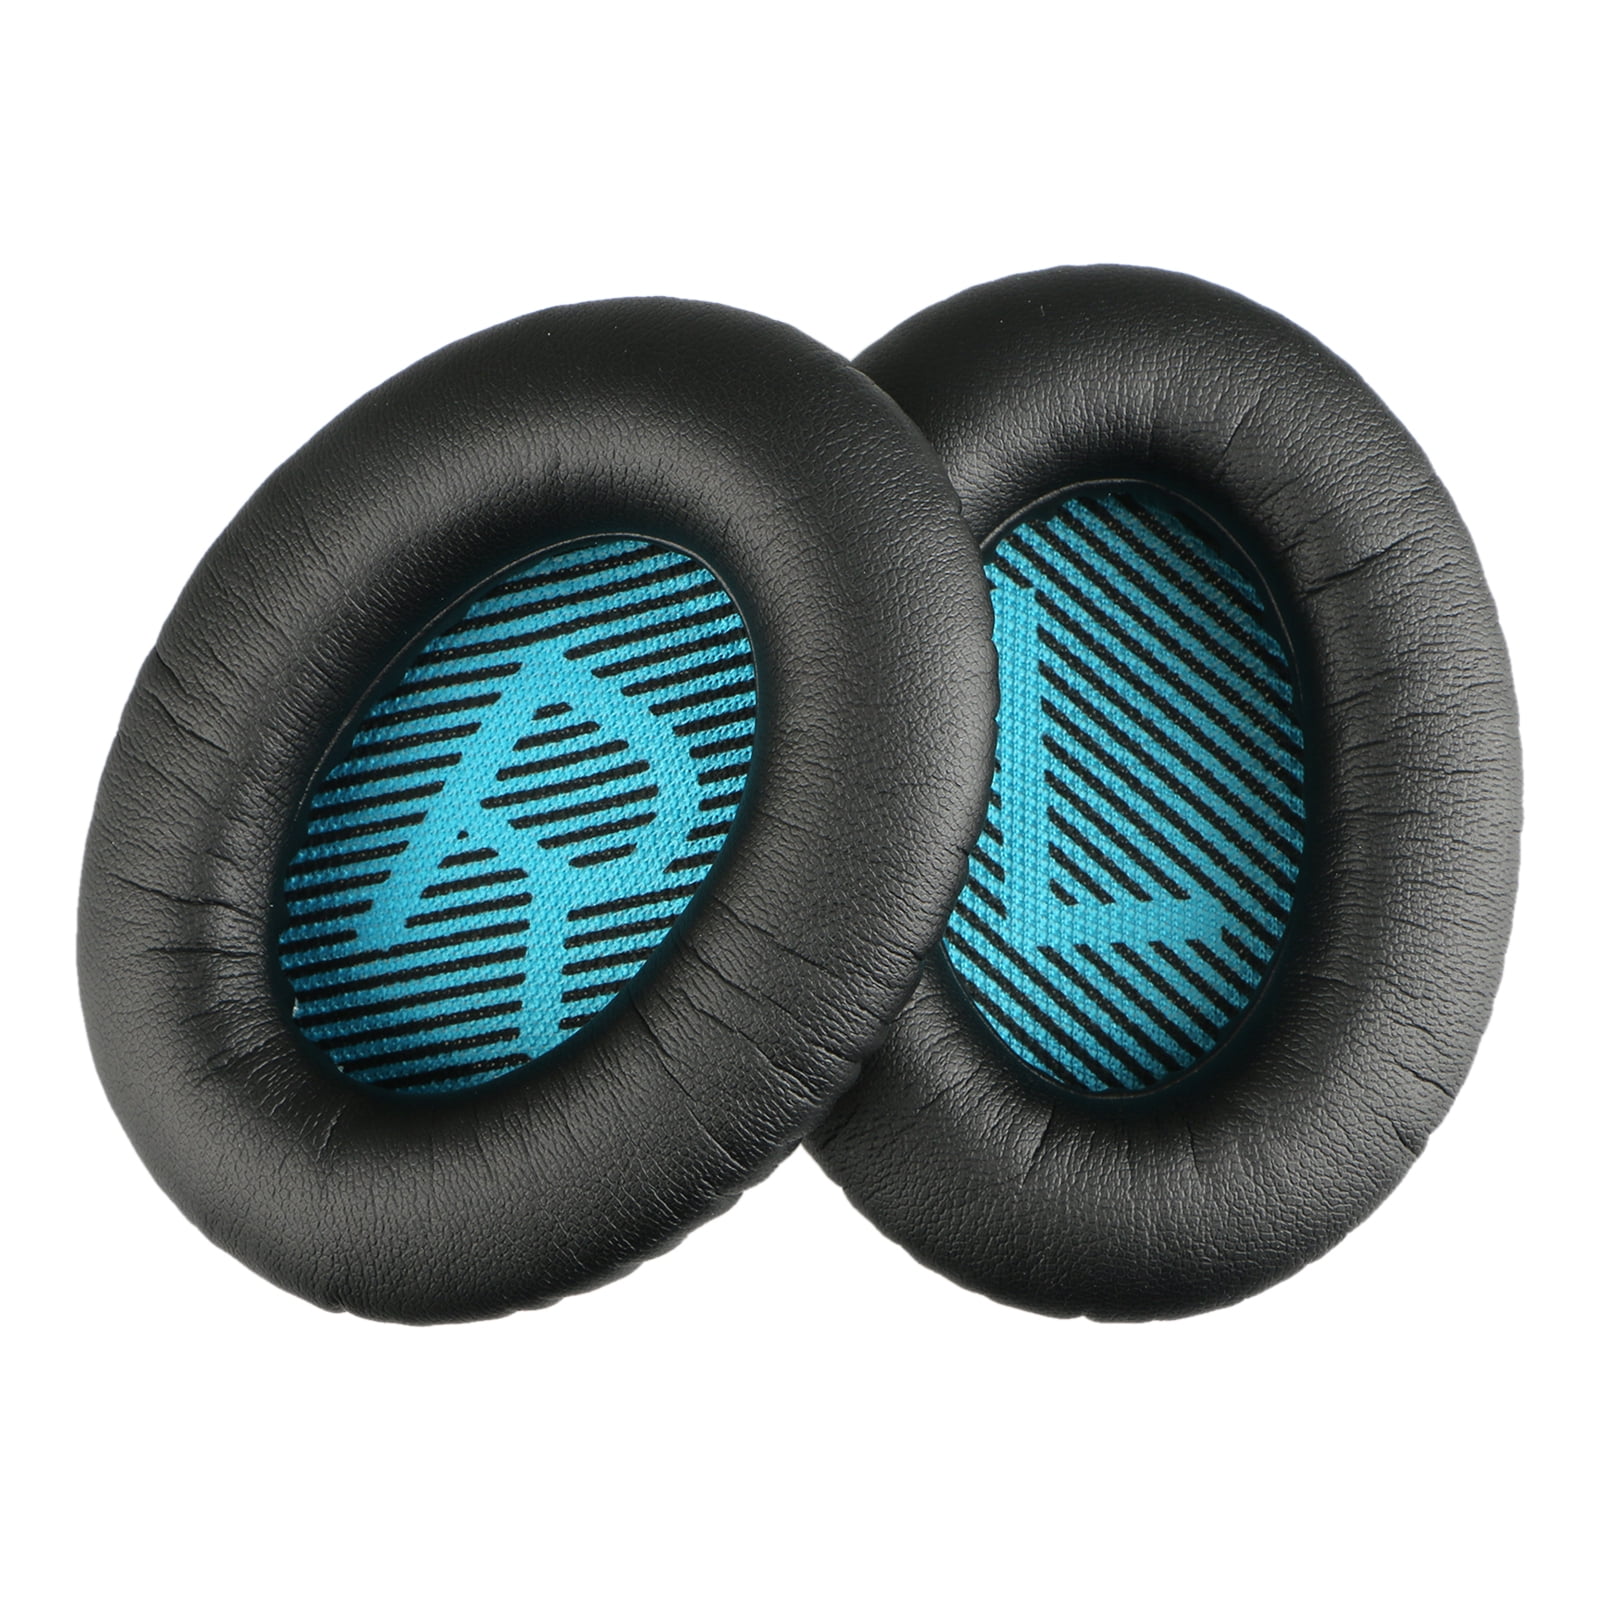 Best Replacement Ear Pads Cushions Leather for BOSE Quiet QC25 QC15 QC2 QC35 AE2 